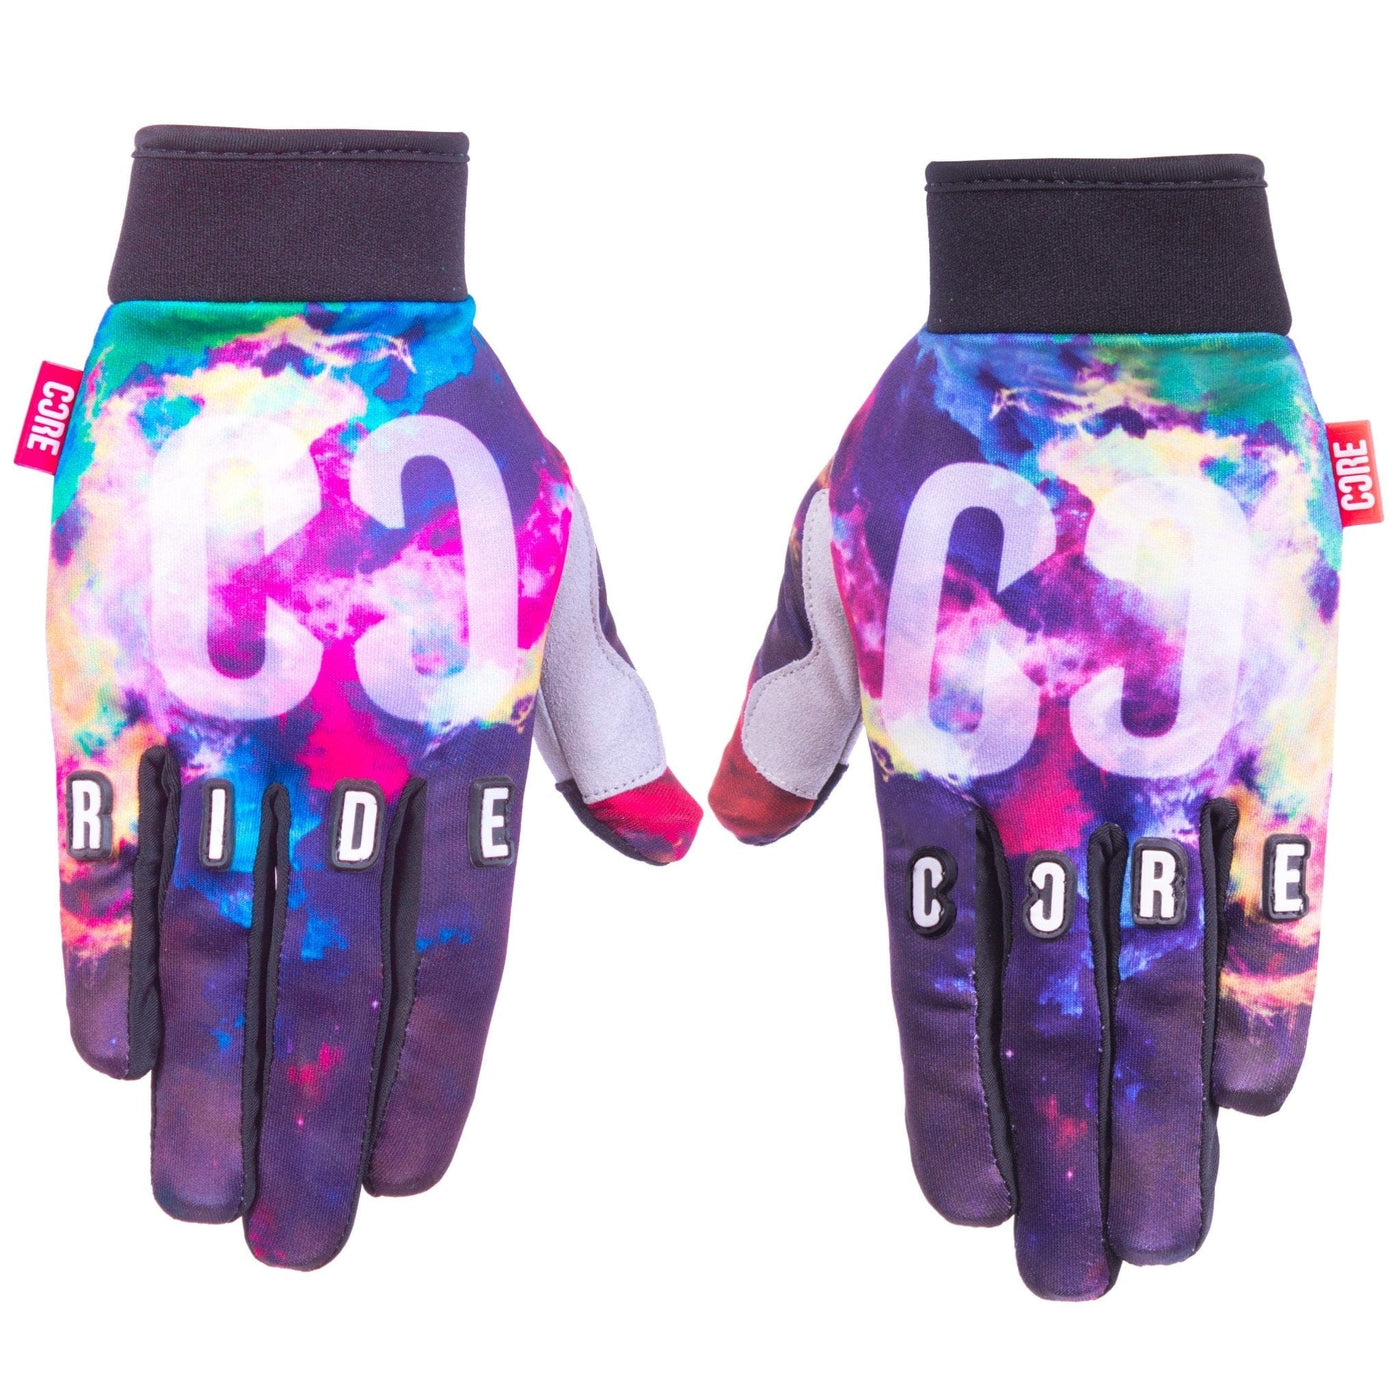 CORE Protection BMX Gloves Neon Galaxy I Bike Gloves Together